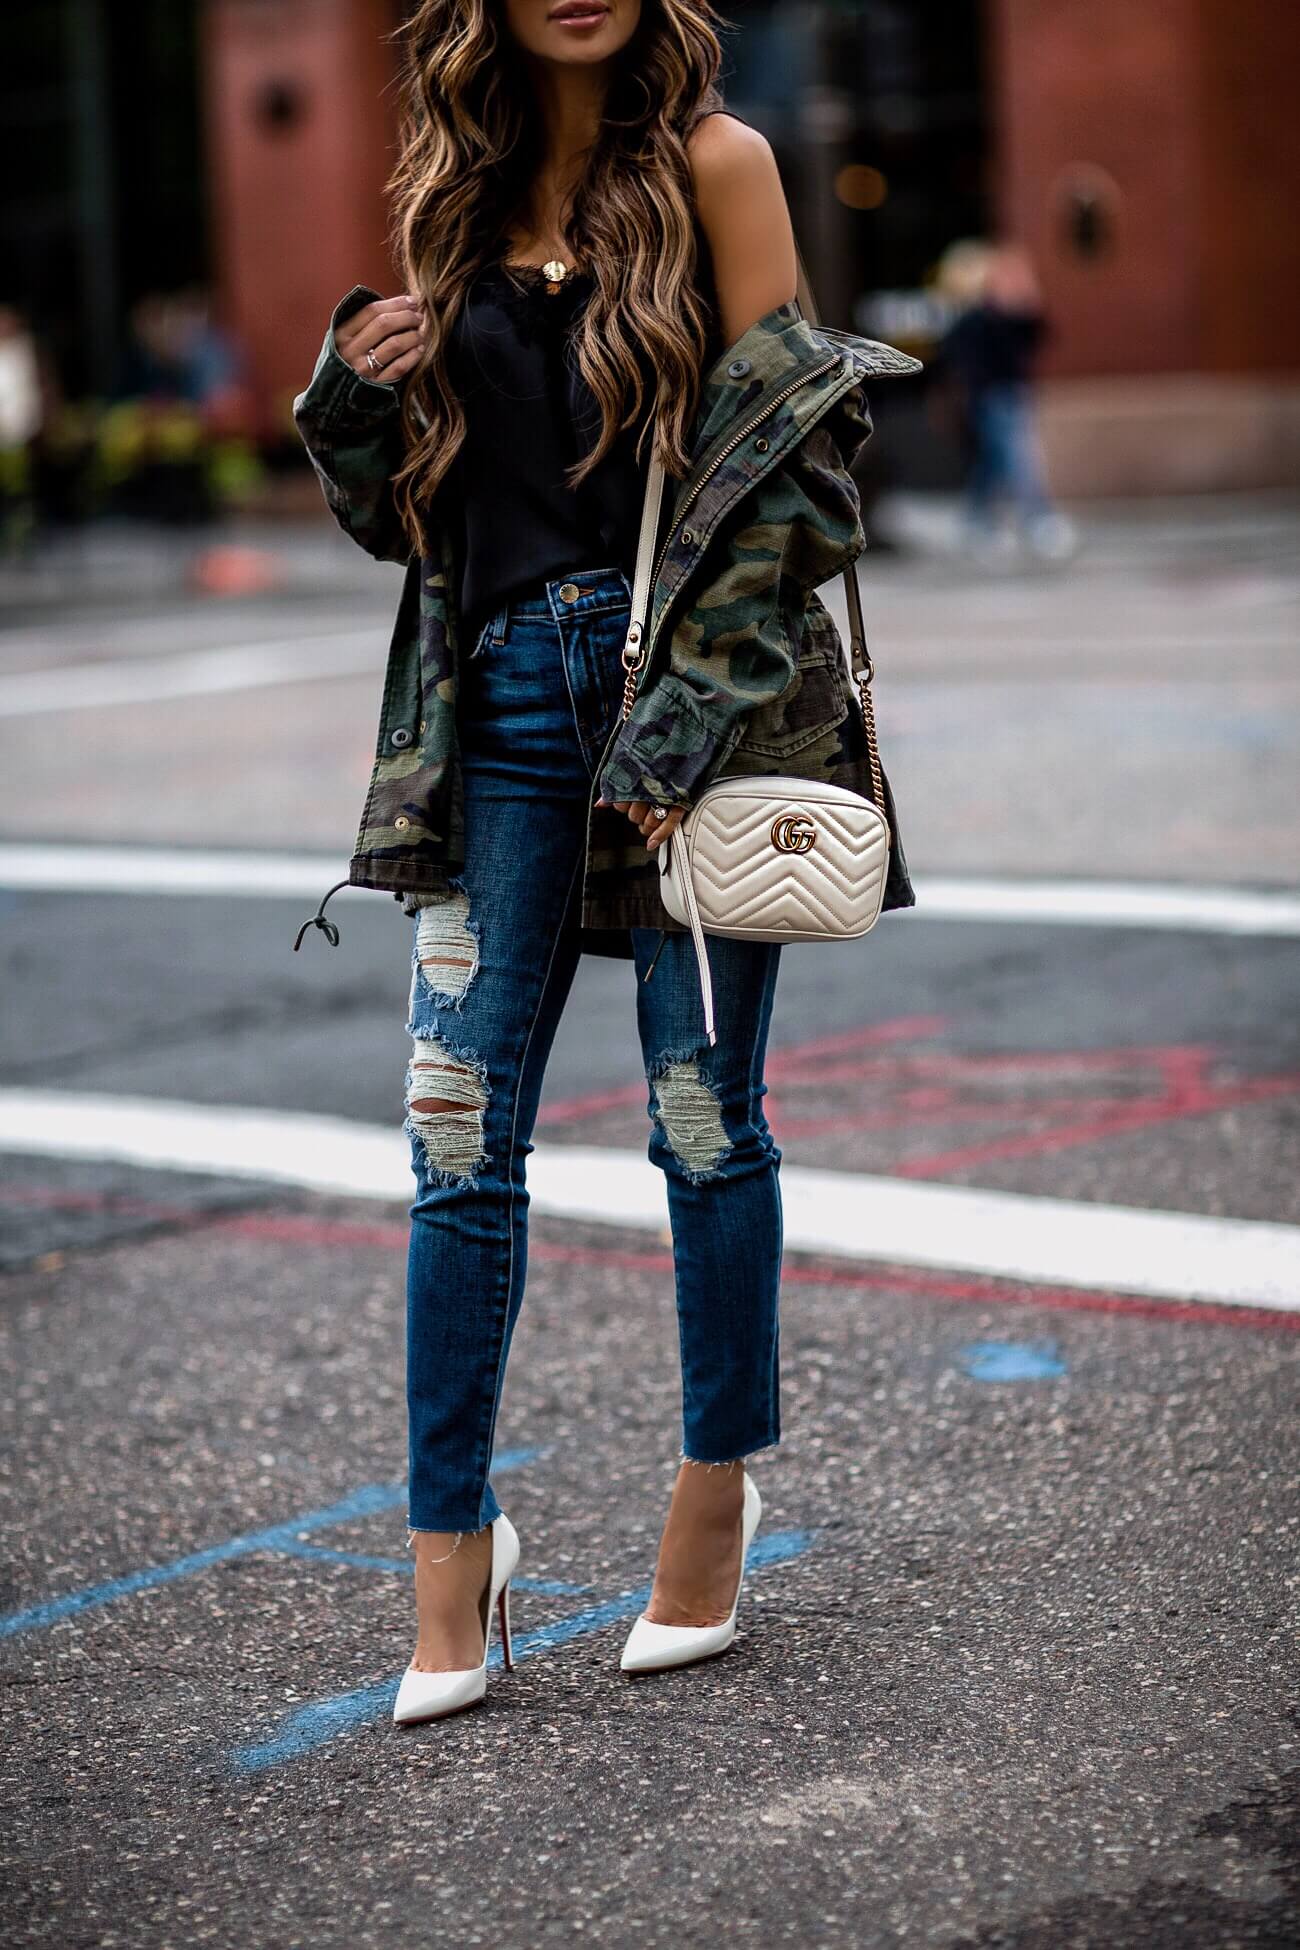 fashion blogger mia mia mine wearing distressed denim from l'agence and a camo jacket from shopbop and christian louboutin white heels